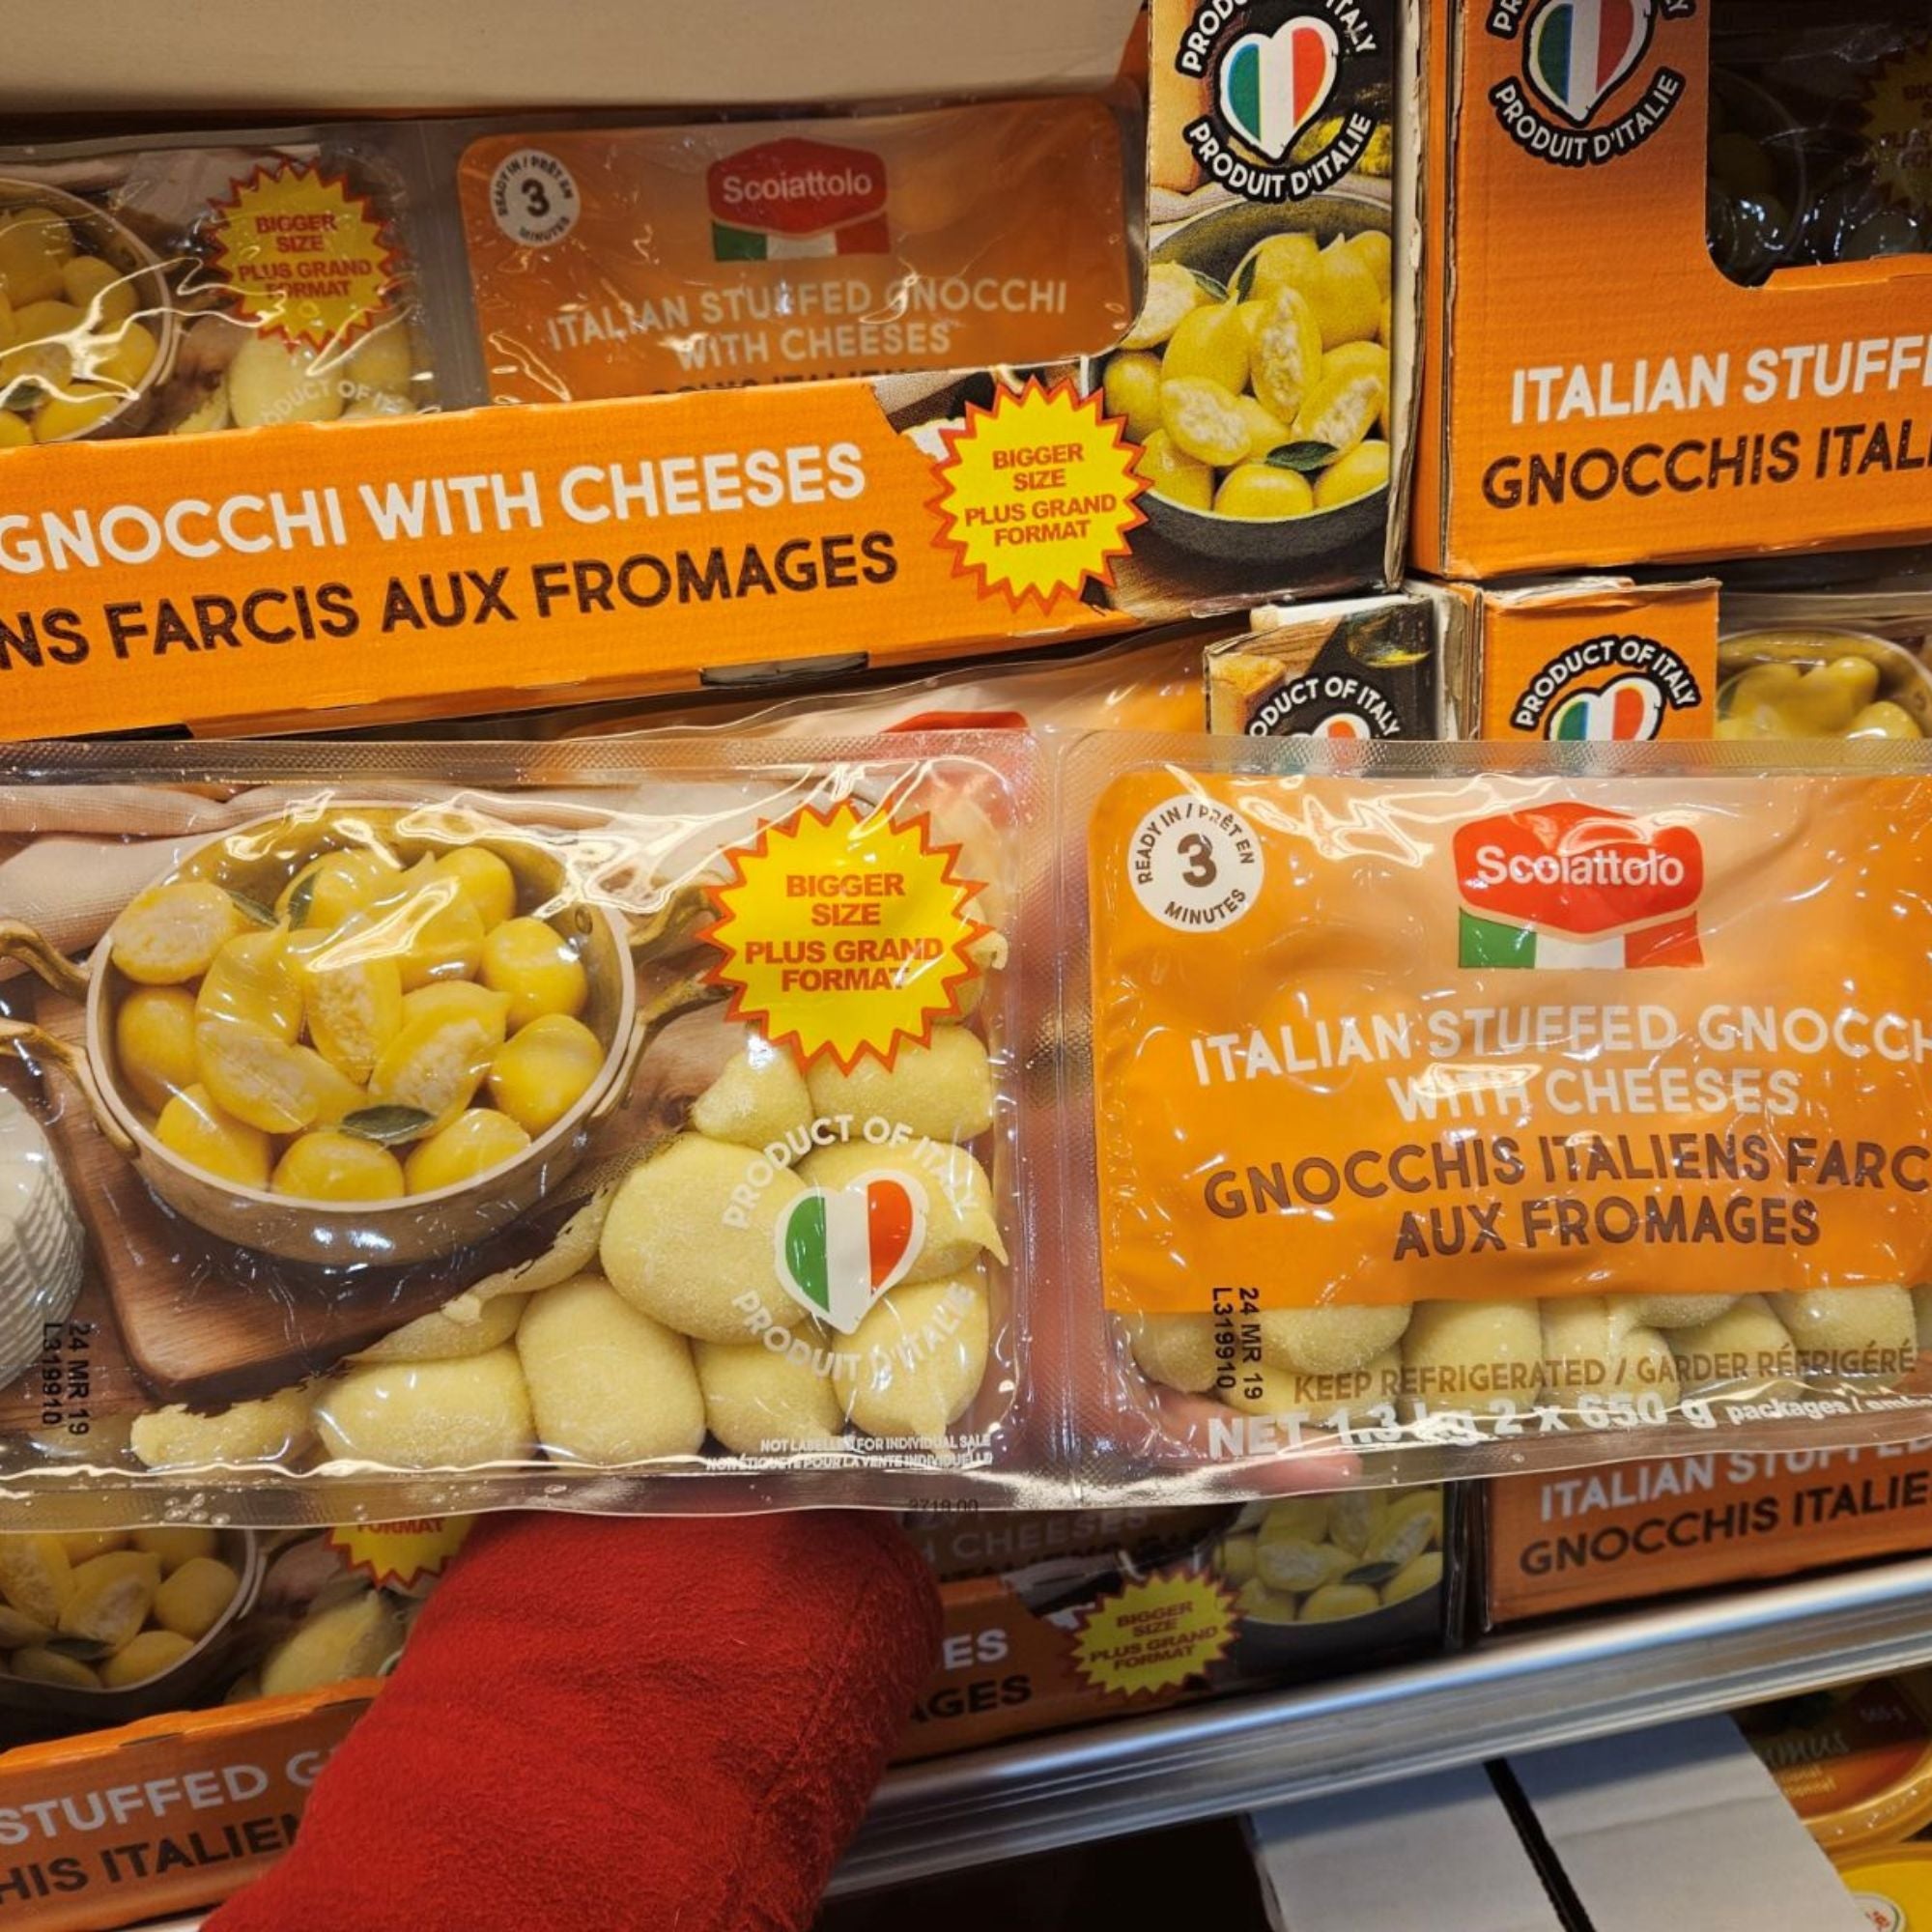 Scoiattolo Italian Stuffed Gnocchi with Cheeses 2 x 650g Shipped to Nunavut  – The Northern Shopper